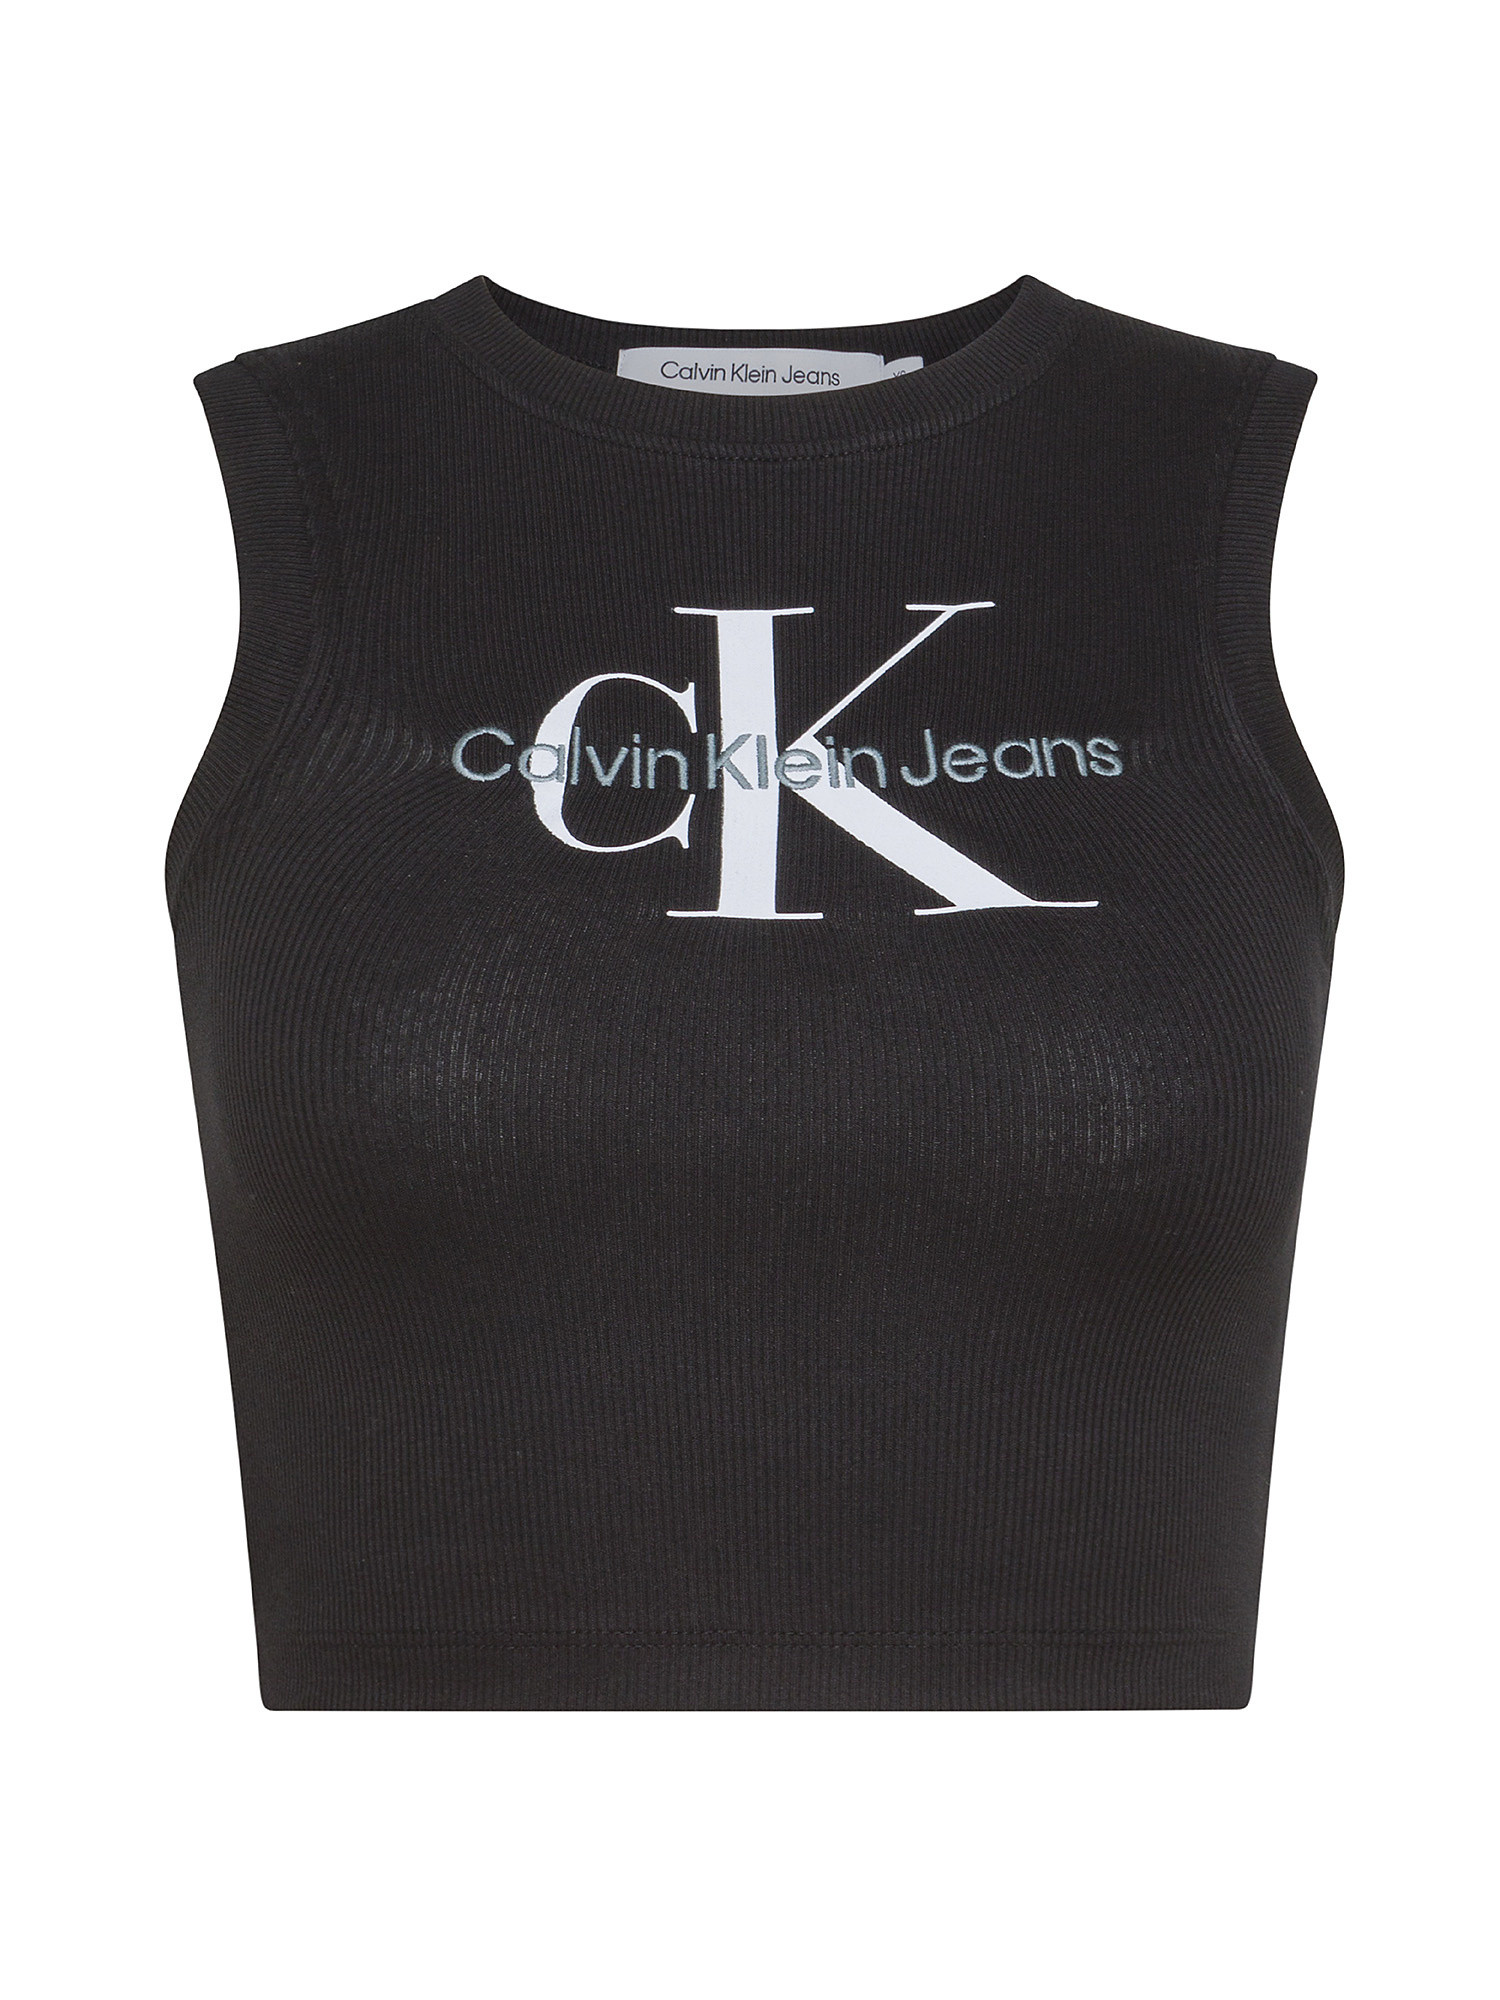 Calvin Klein Jeans - Canotta cropped a costine con logo, Nero, large image number 0